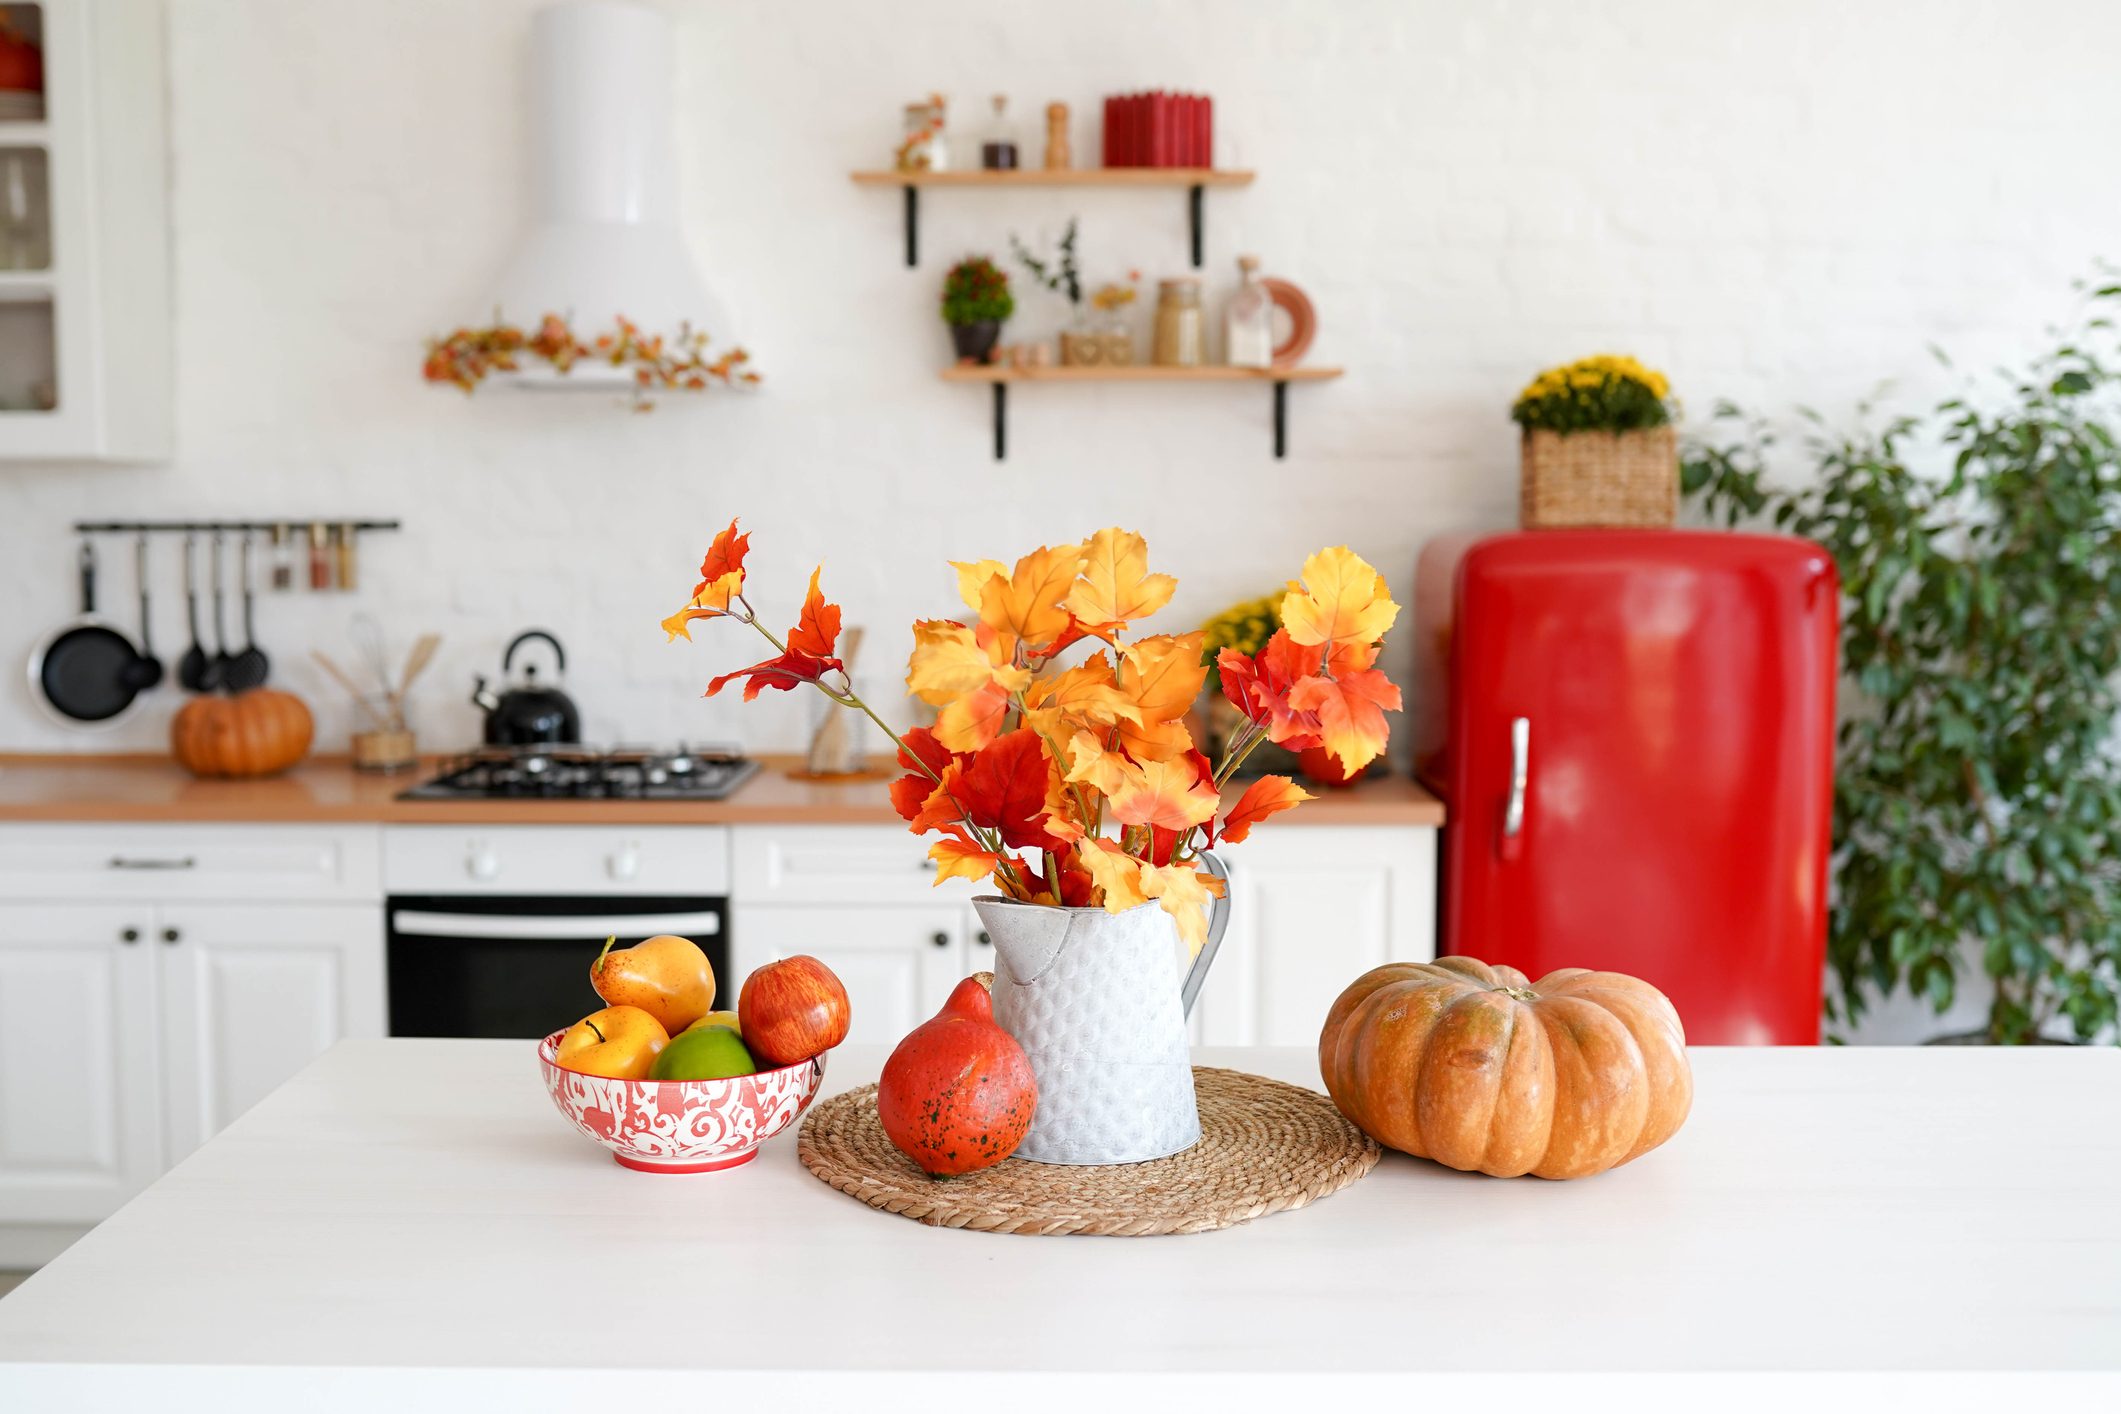 autumn table with vegetables and autumn decor in kitchen. red and yellow leaves in the vase and pumpkin on white background.